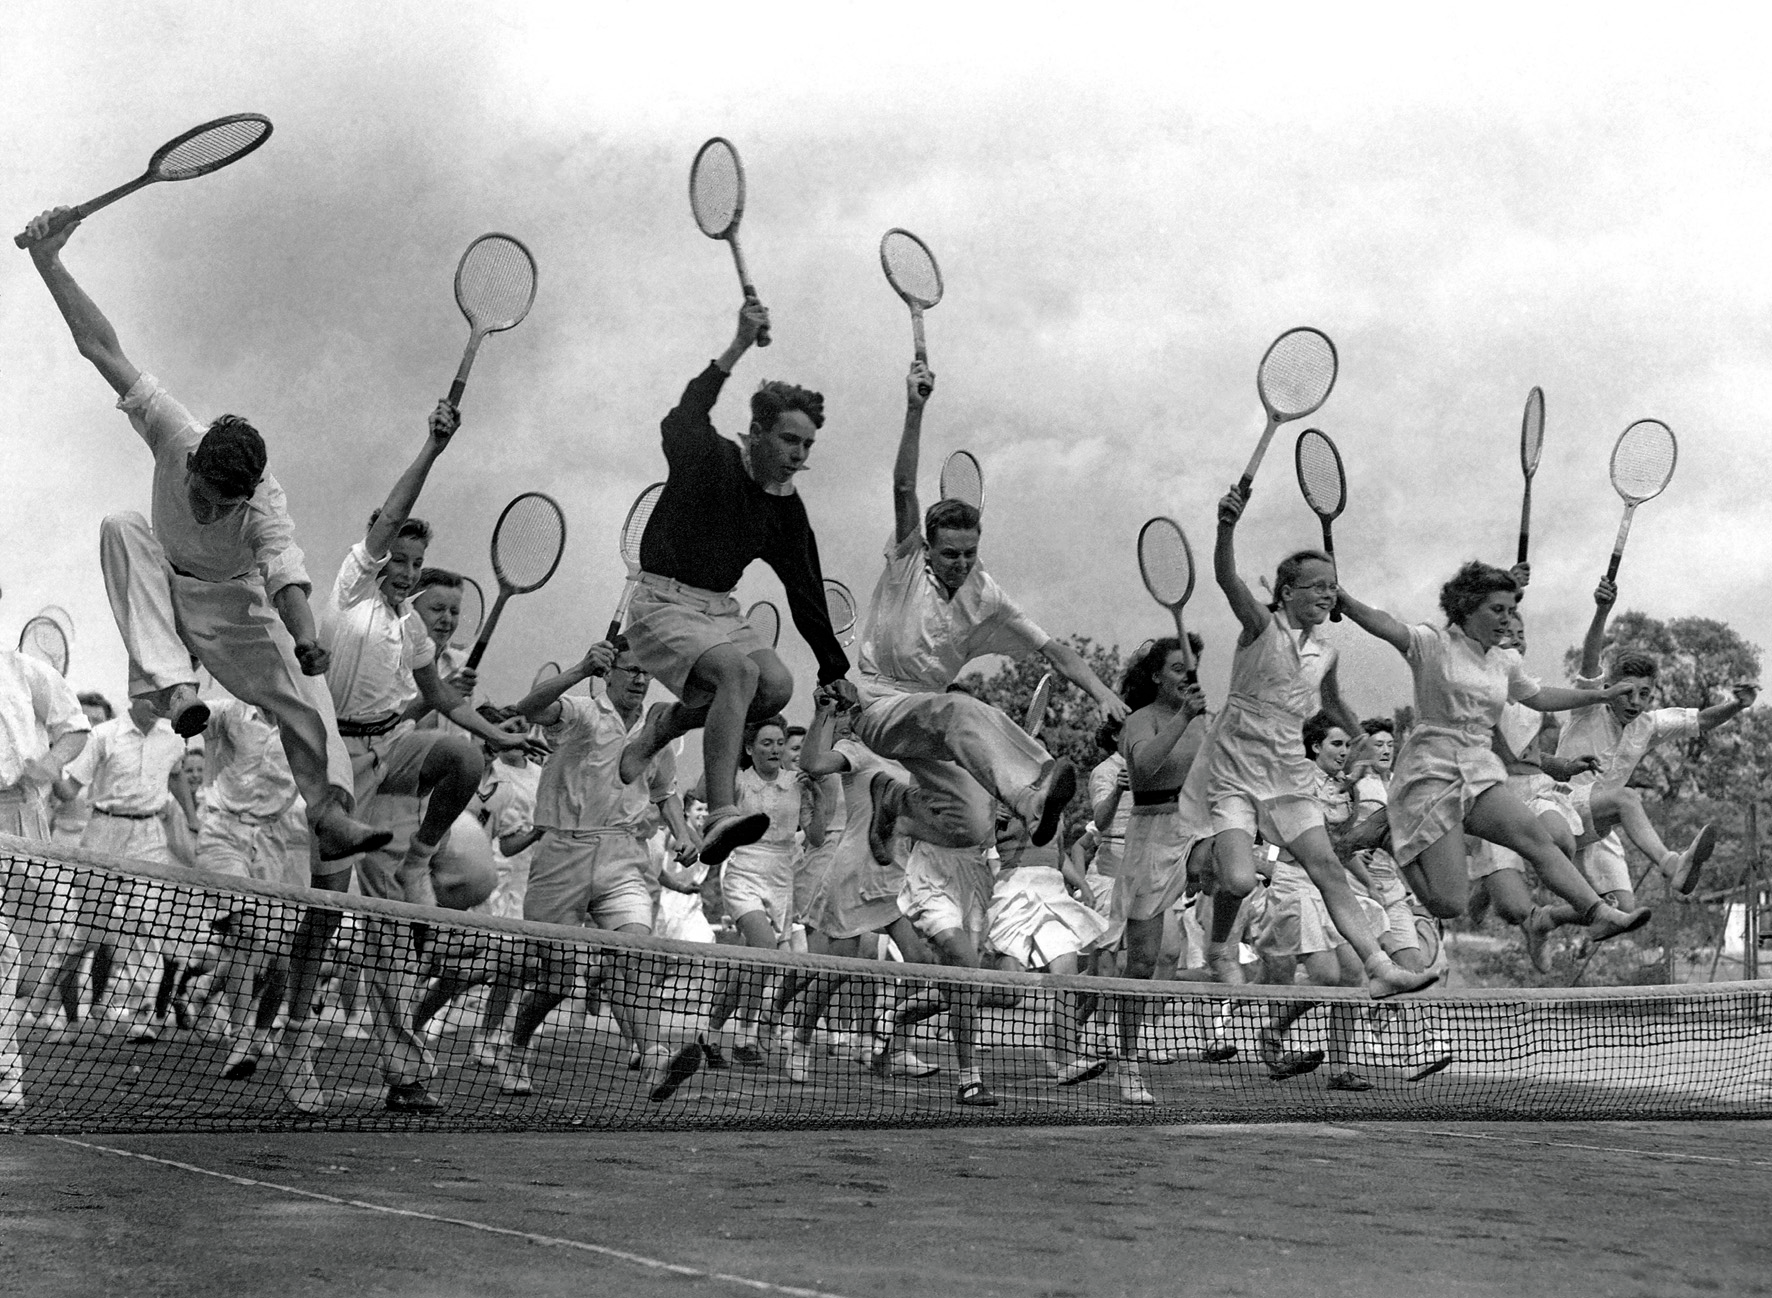   © The Stylish Life - Tennis, published by teNeues, www.teneues.com. Competitors at Tennis Tournament Jump over Net, Photo © Hulton-Deutsch Collection/CORBIS.  